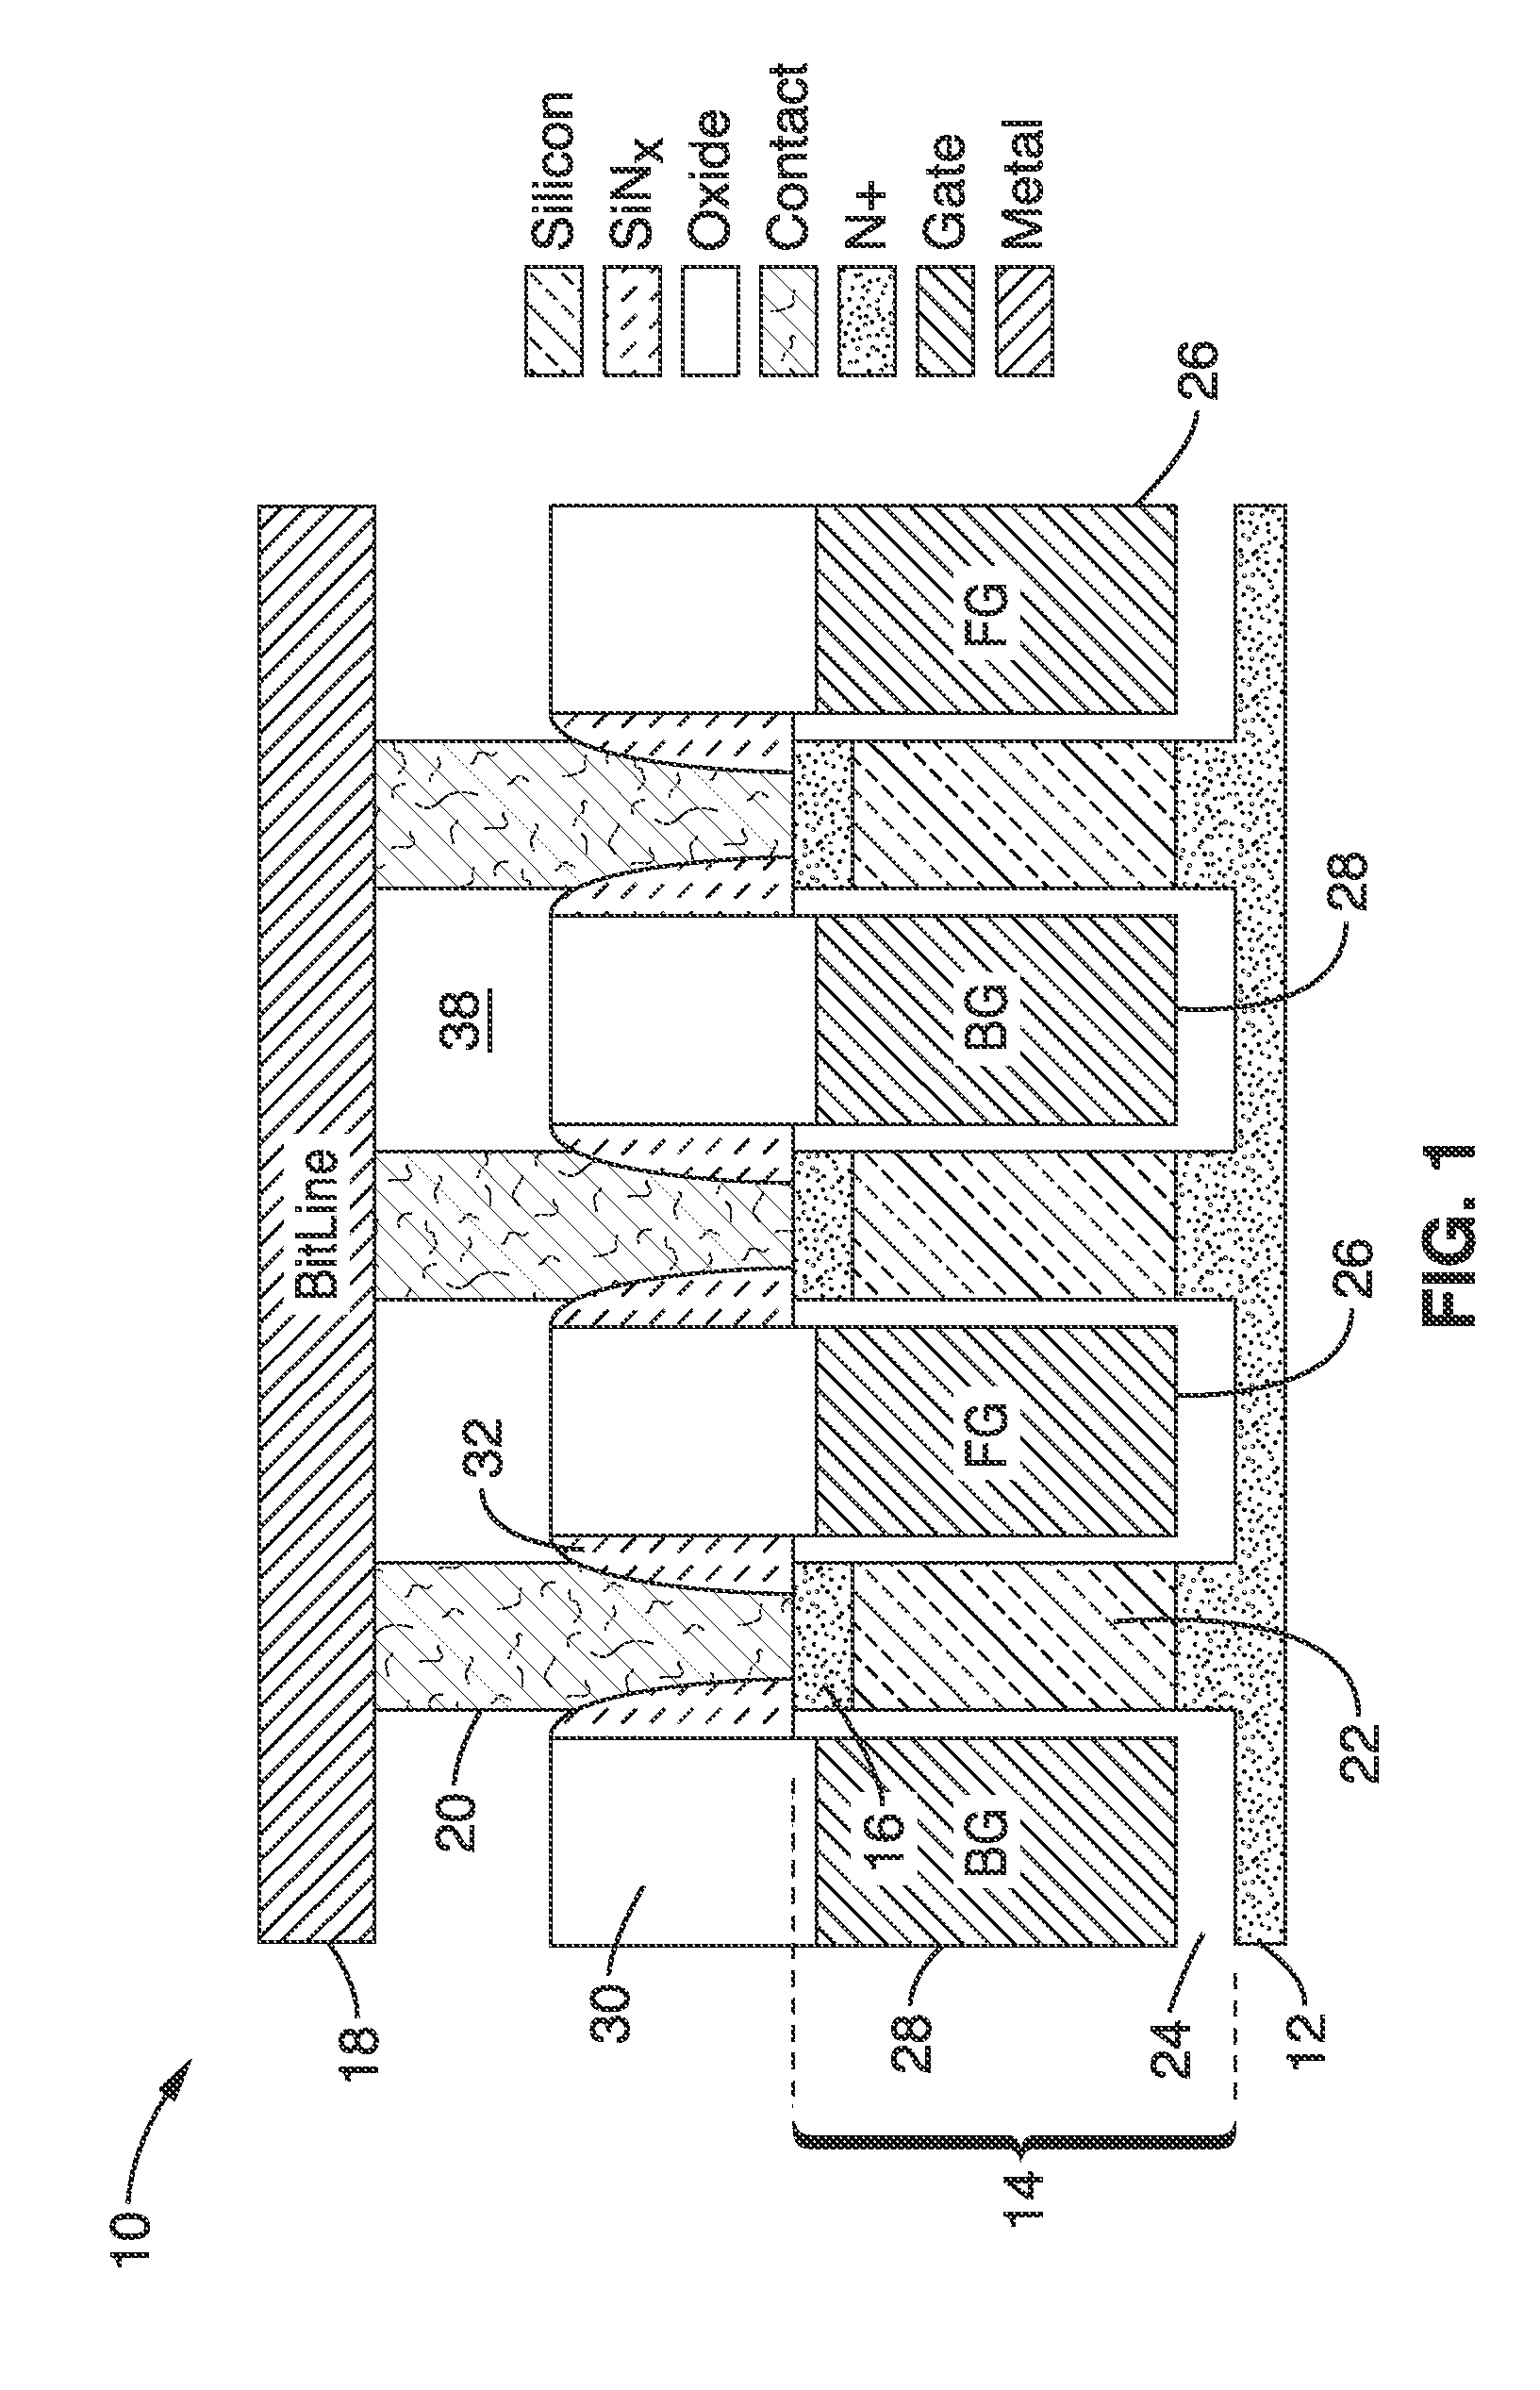 Dram cell utilizing a doubly gated vertical channel